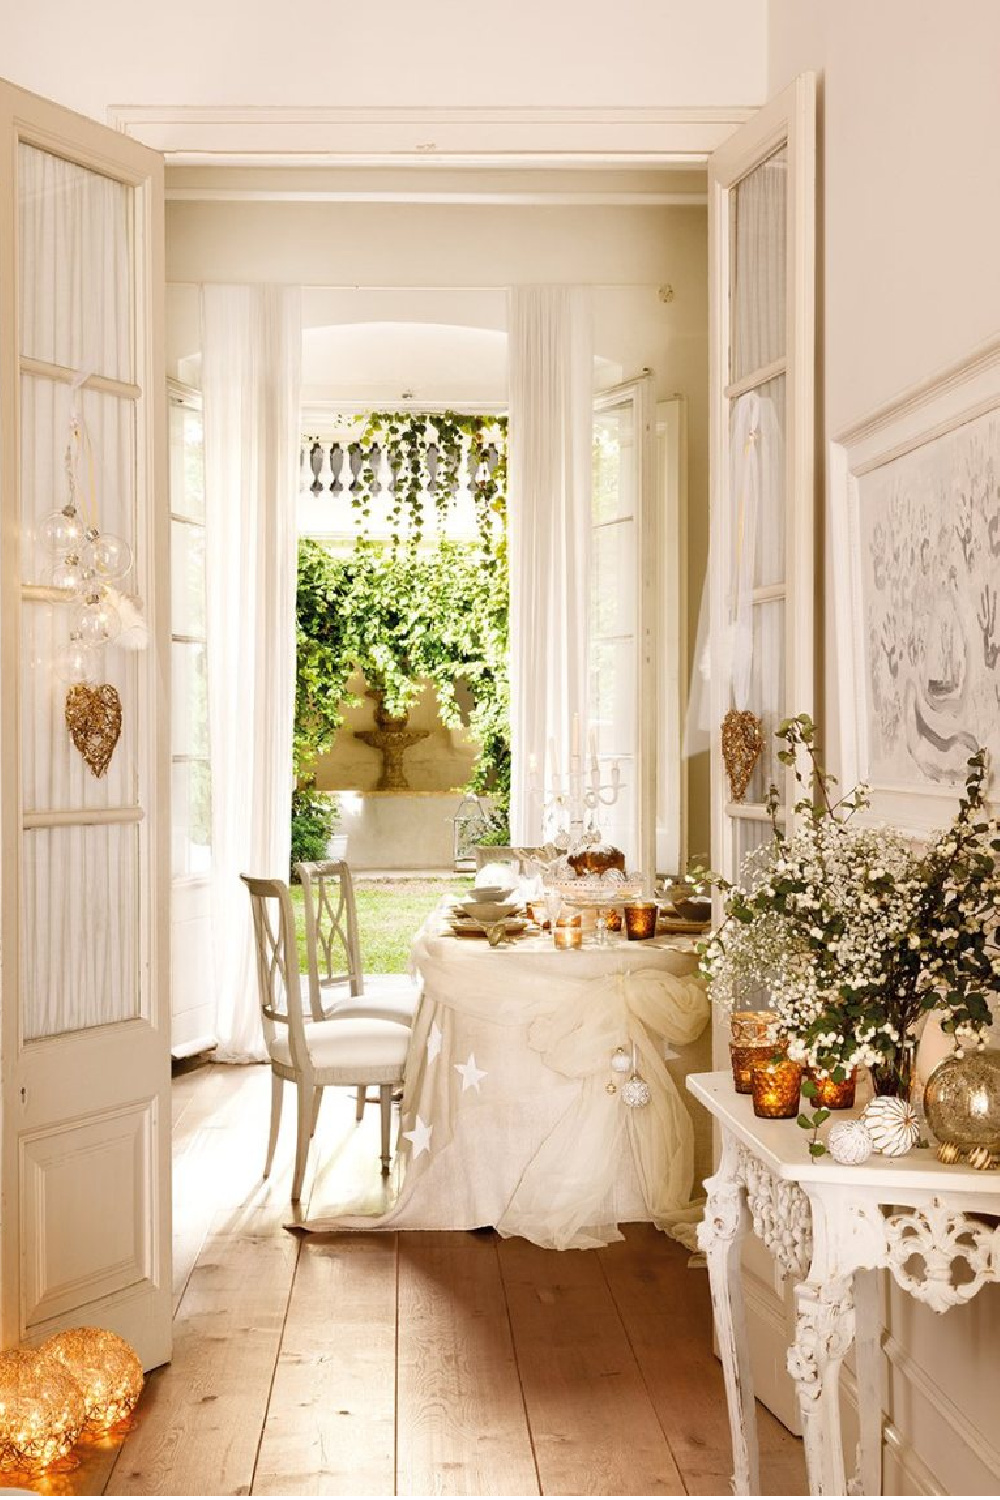 White country French decorated 1864 home on the Maresme Coast of Spain is decorated in whites for Christmas. #christmasdecor #housetour #whitechristmas #romanticchristmas #frenchcountry #frenchchristmas #whitedecor